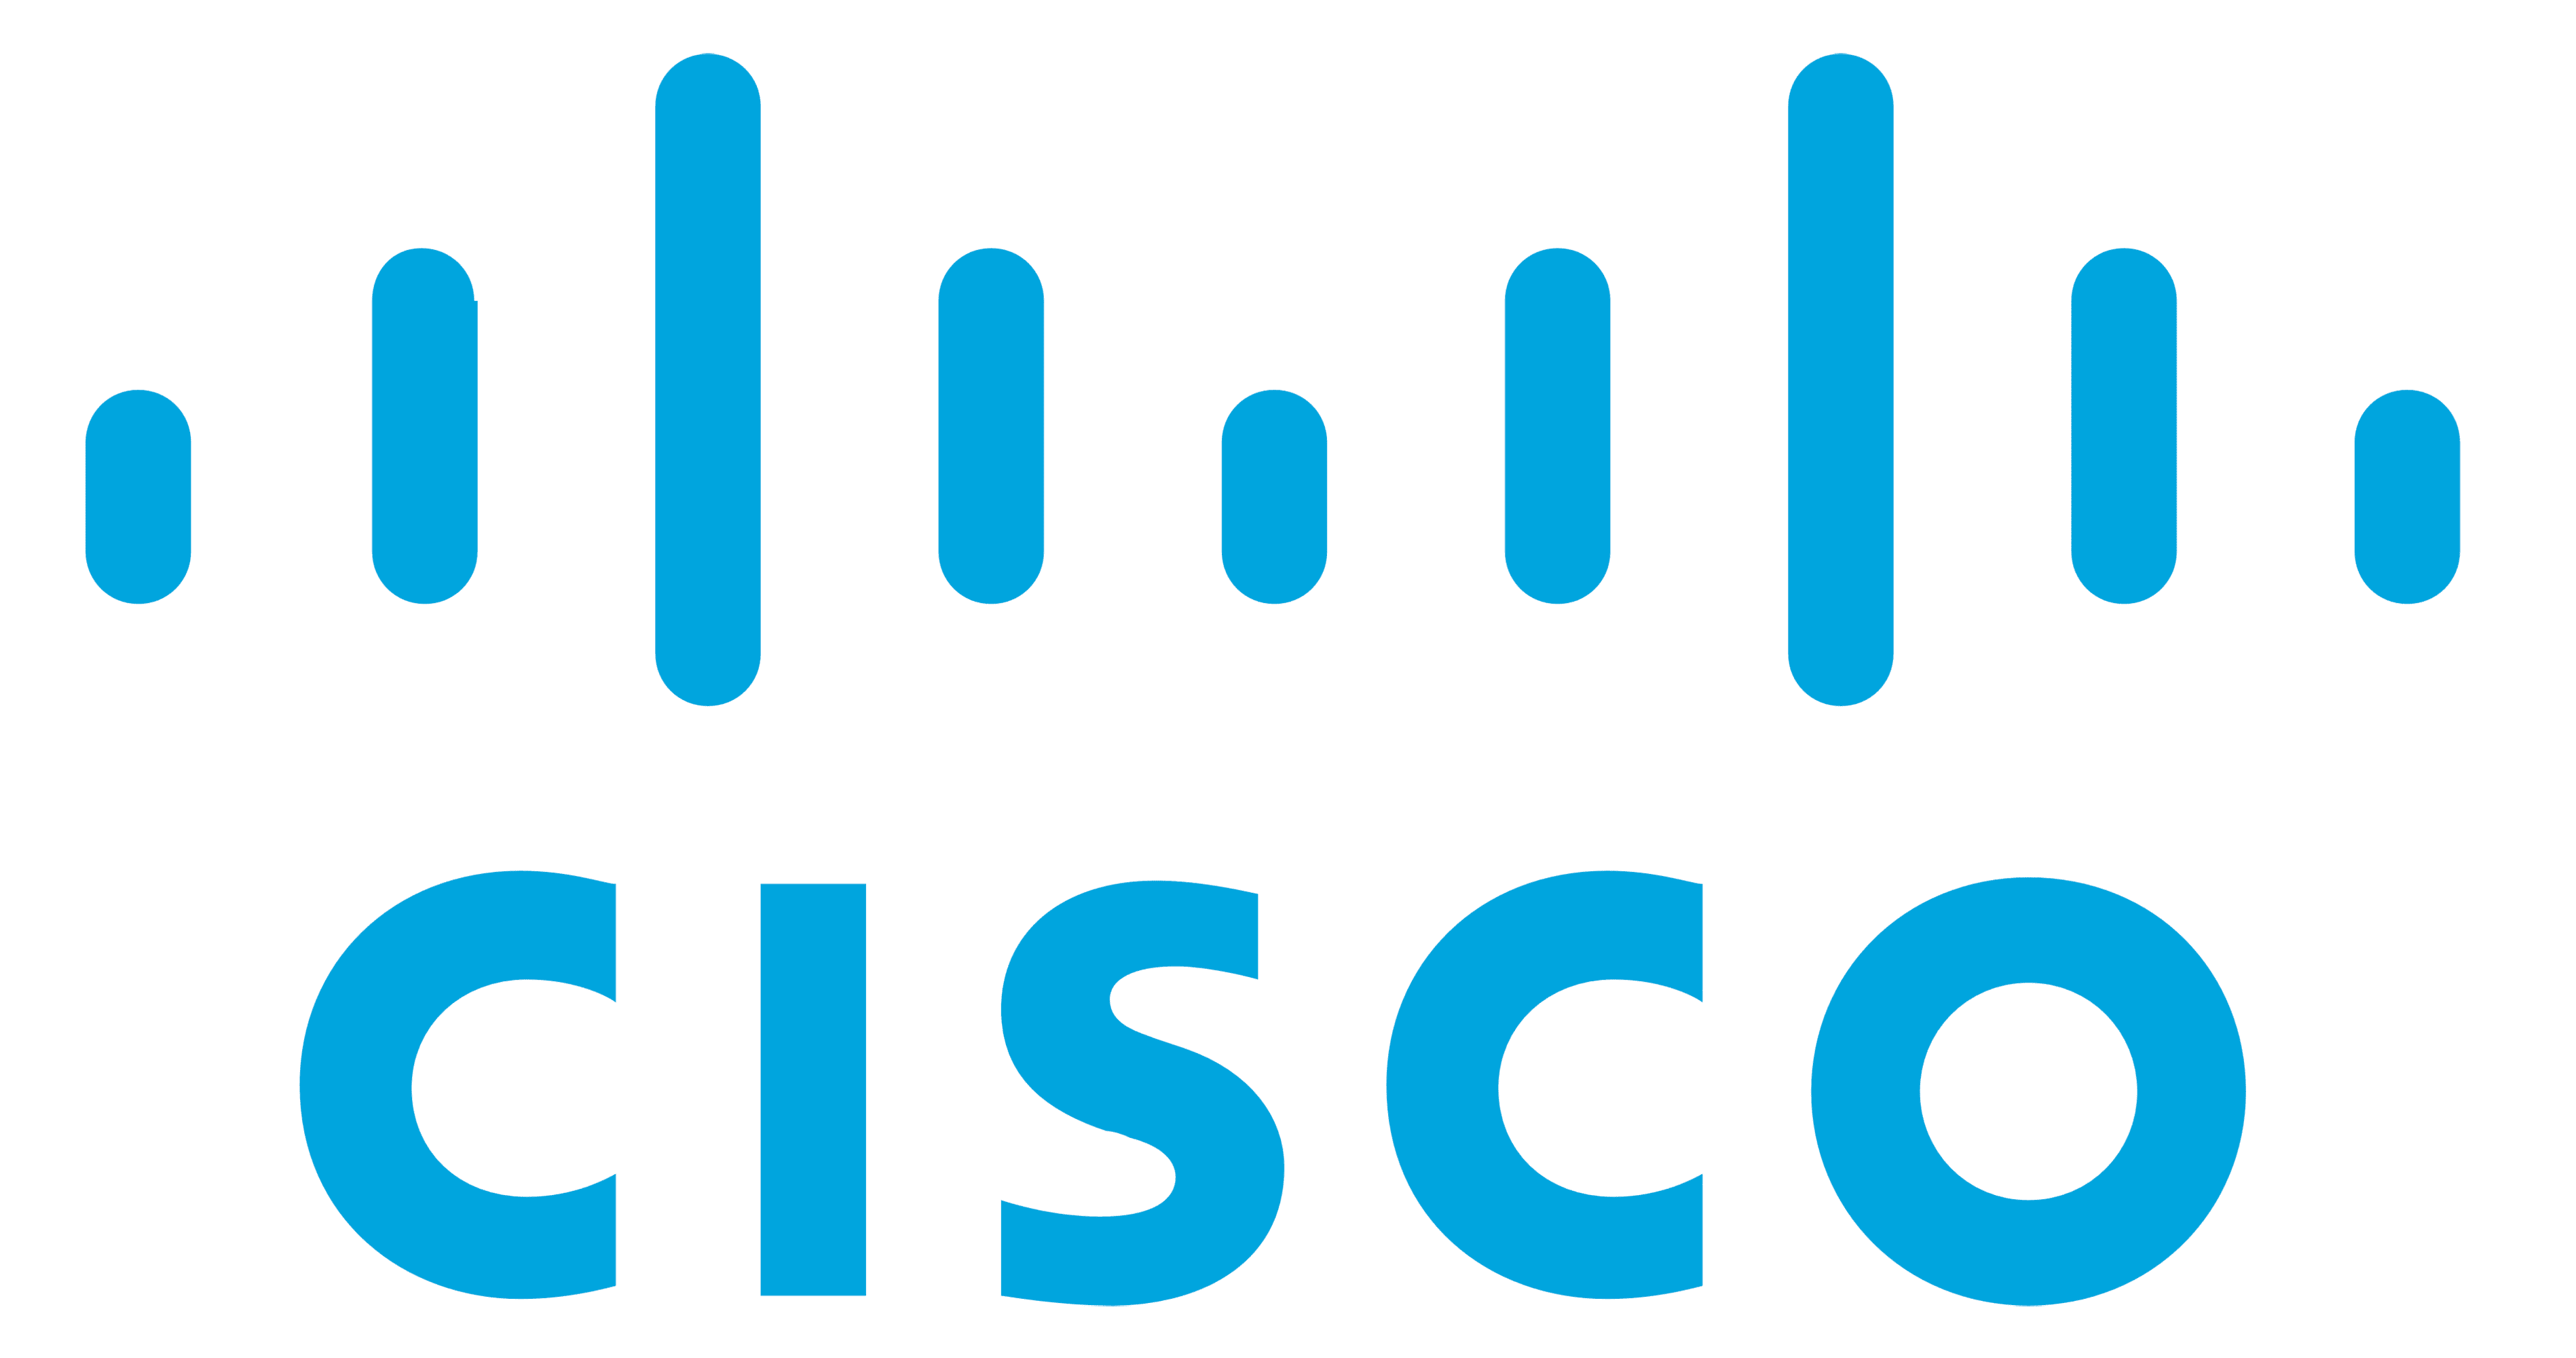 Cisco Logo - A company that provides certifications for Entry level IT jobs